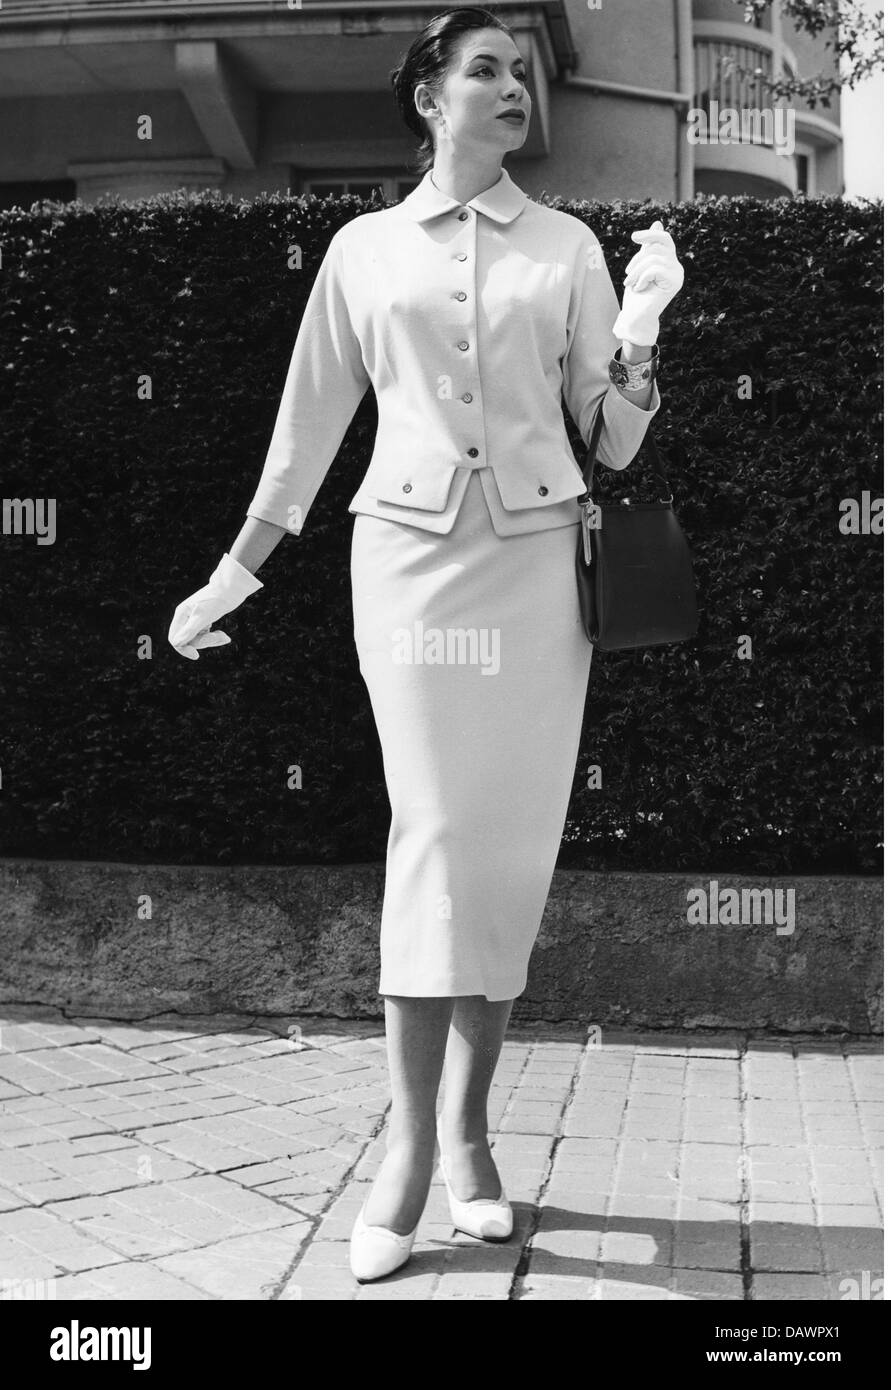 fashion, ladies' fashion, fashion model in woman's suit with handbag, Germany, 1957, Additional-Rights-Clearences-Not Available Stock Photo